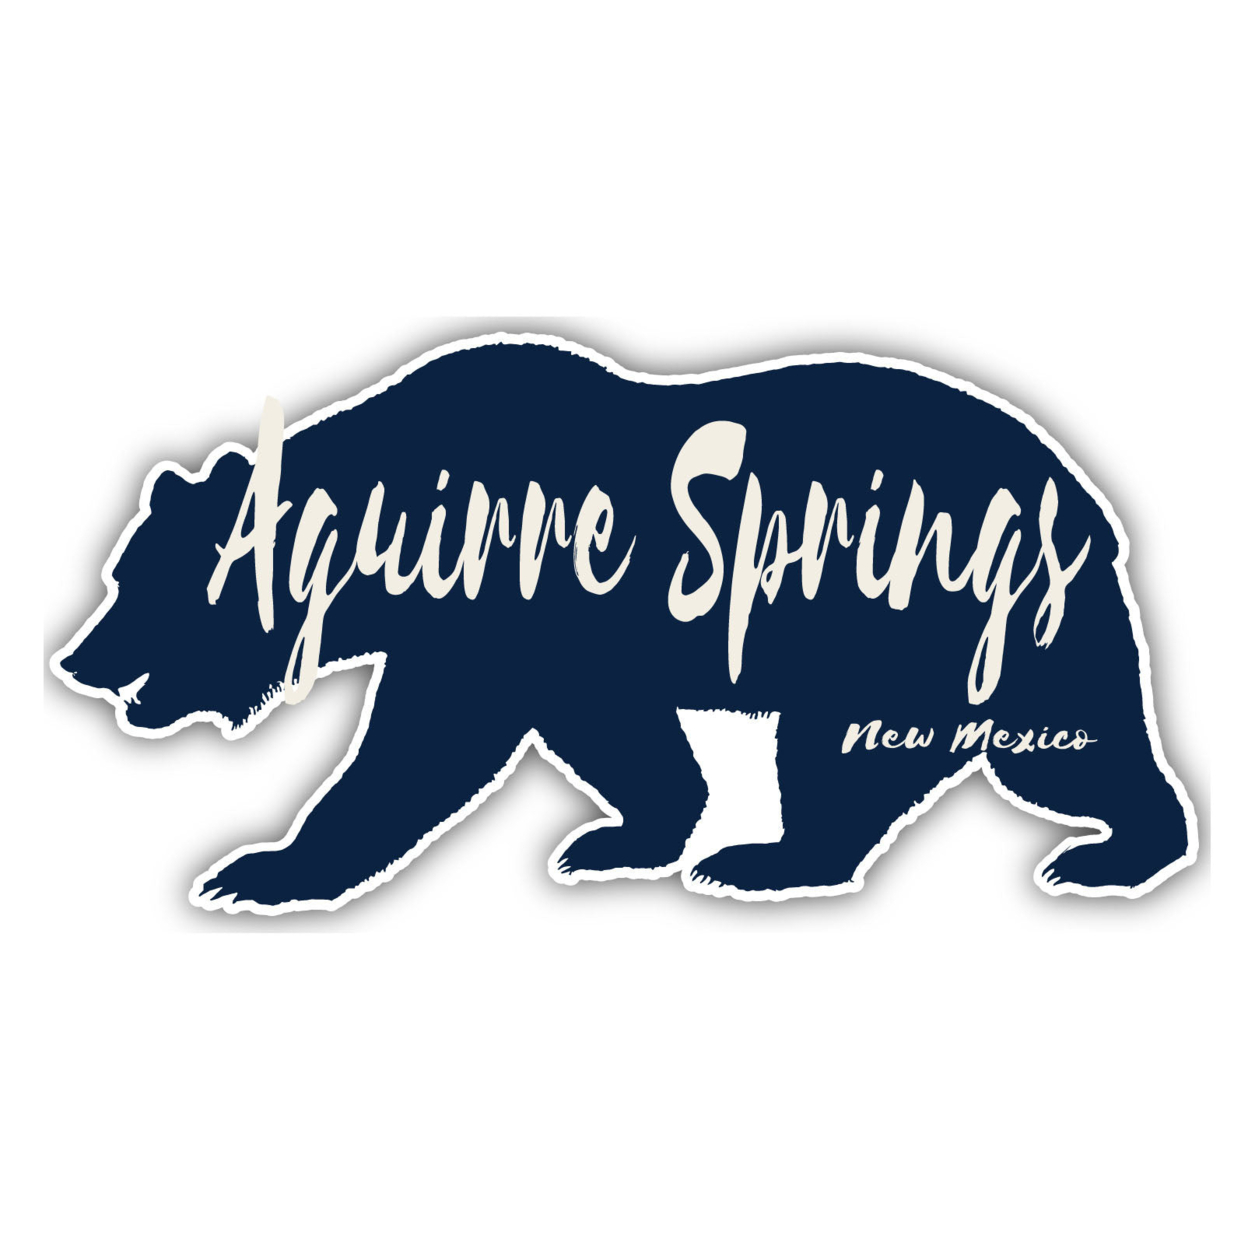 Aguirre Springs New Mexico Souvenir Decorative Stickers (Choose Theme And Size) - Single Unit, 10-Inch, Bear